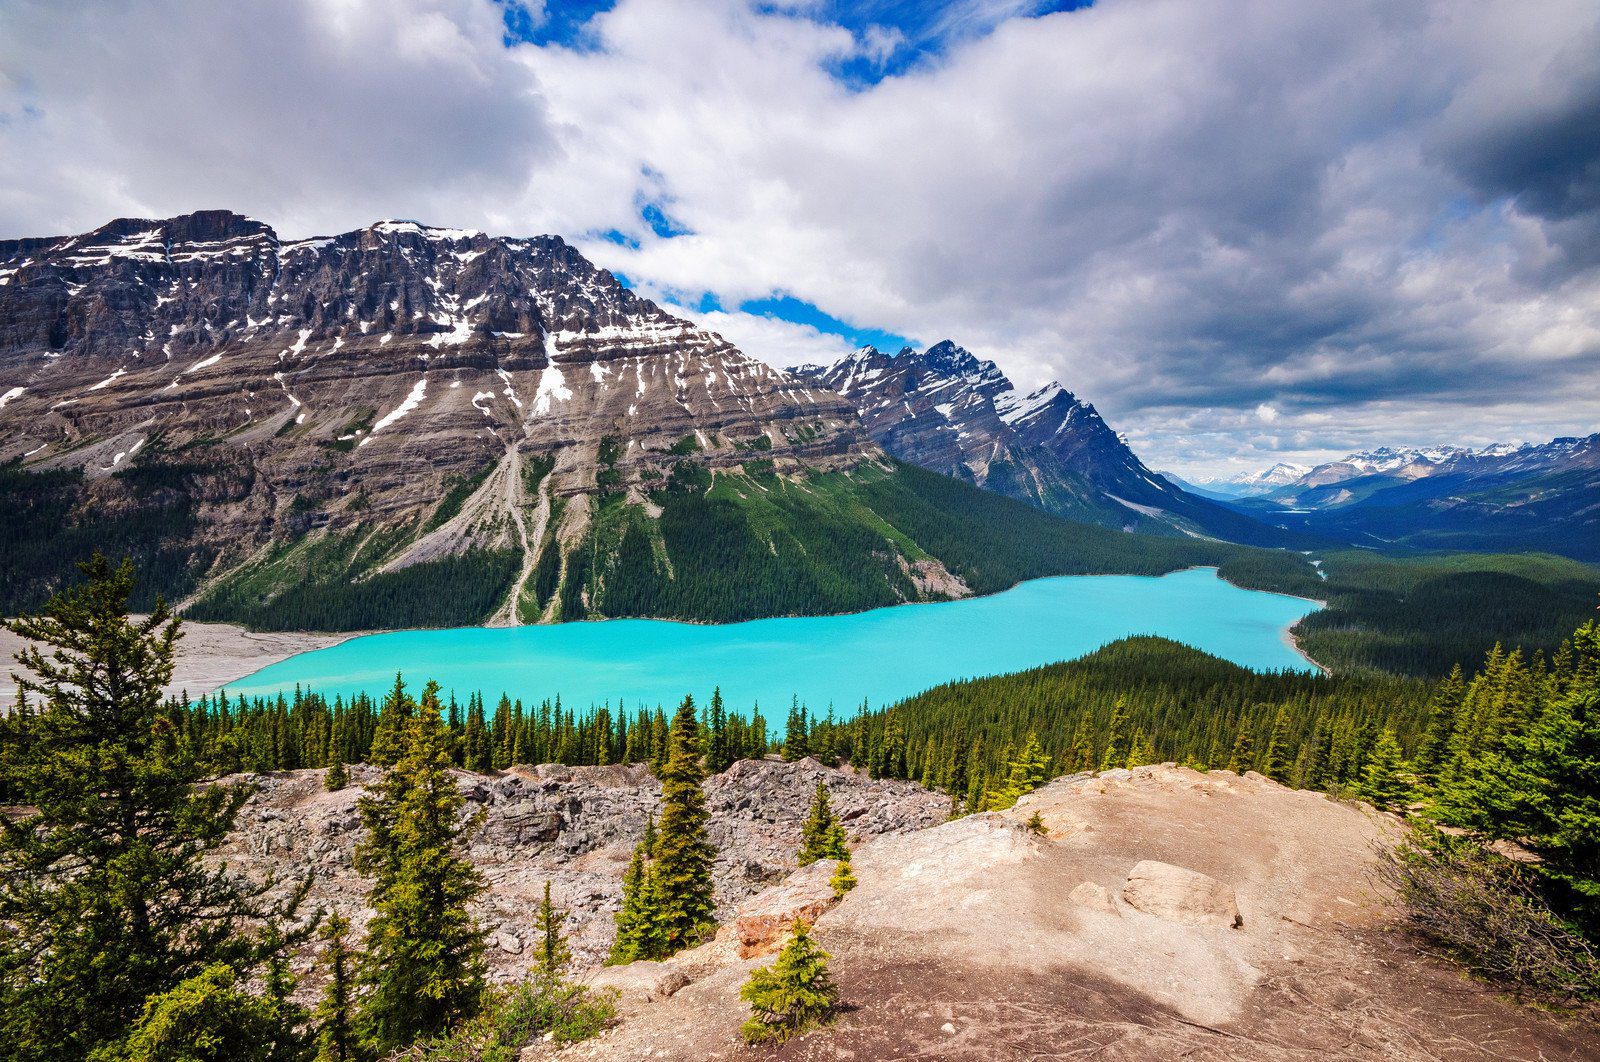 View over Lake Peyto along the Canadian Icefields Parkway